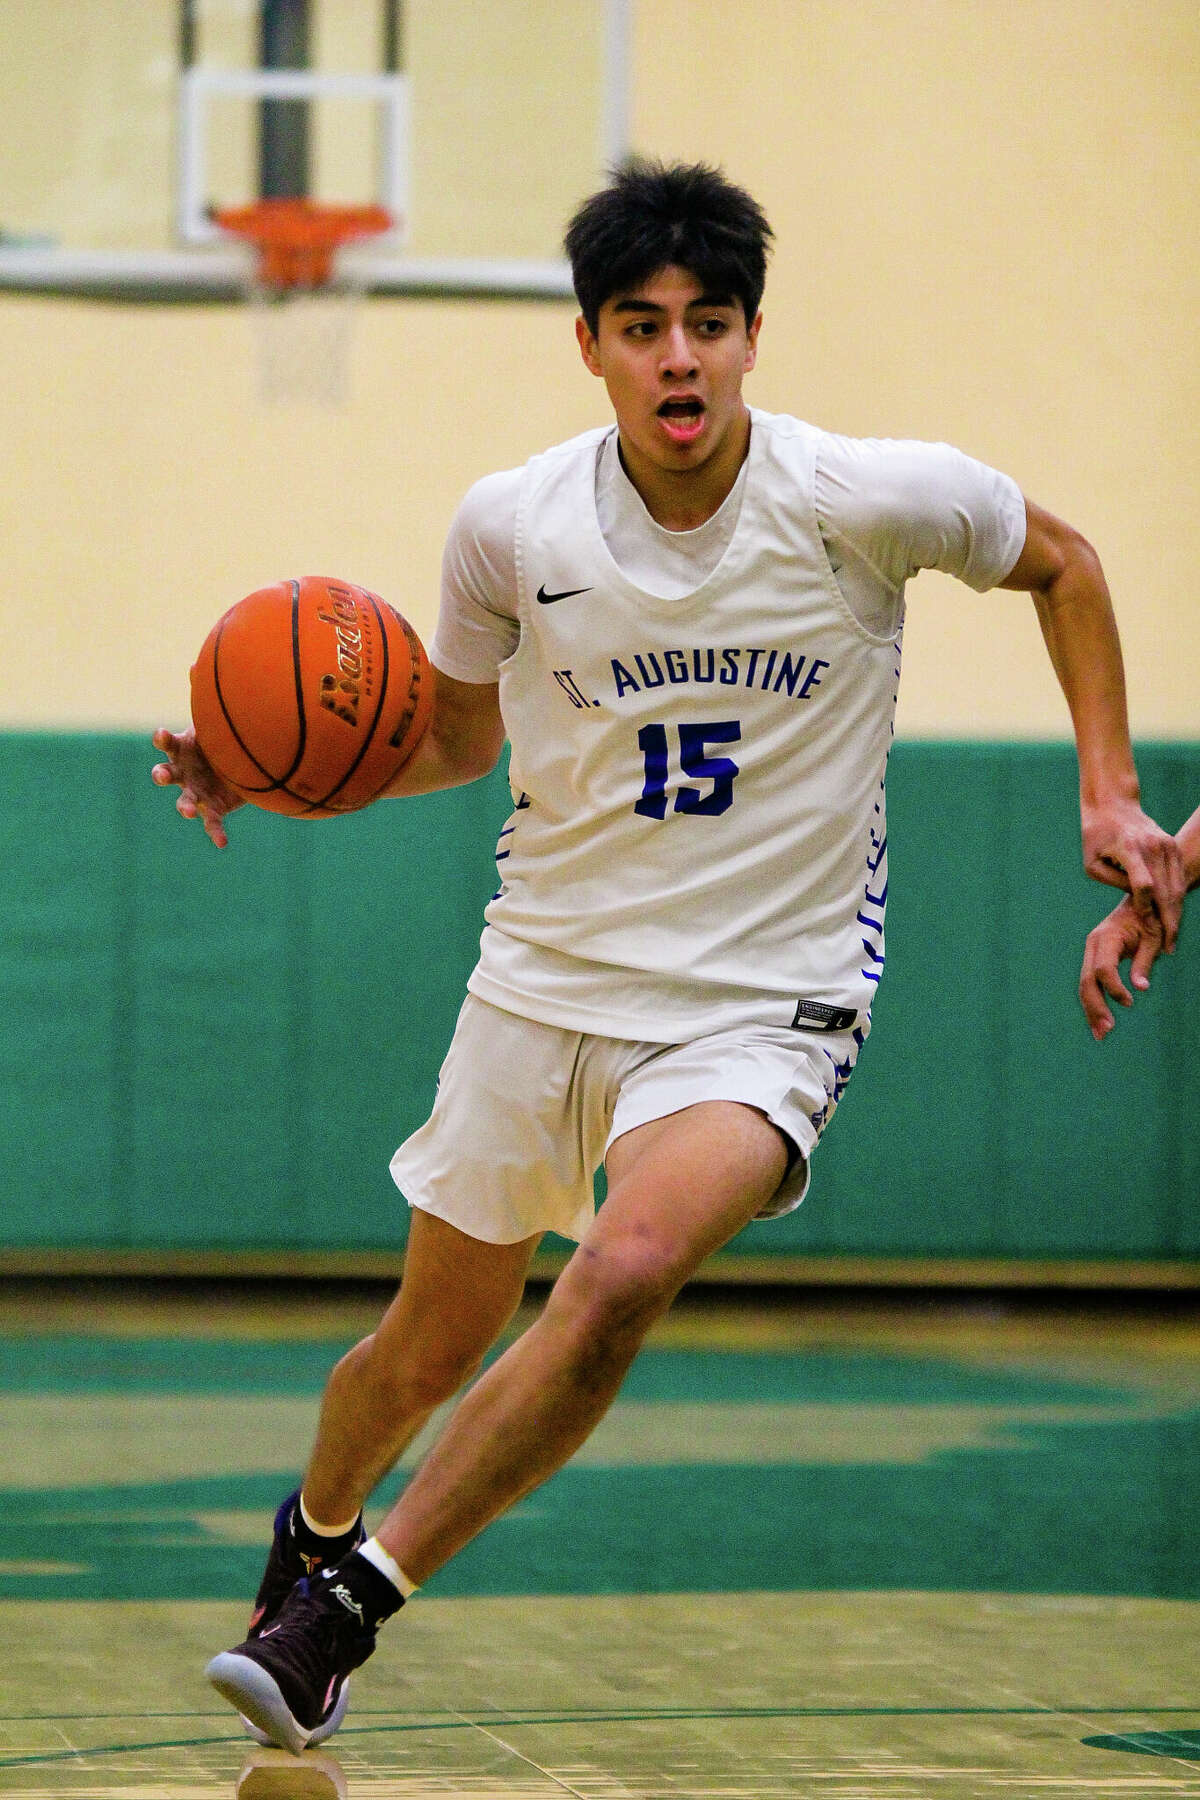 Chris Ramirez and the St. Augustine Knights will travel to face SACS on Tuesday.